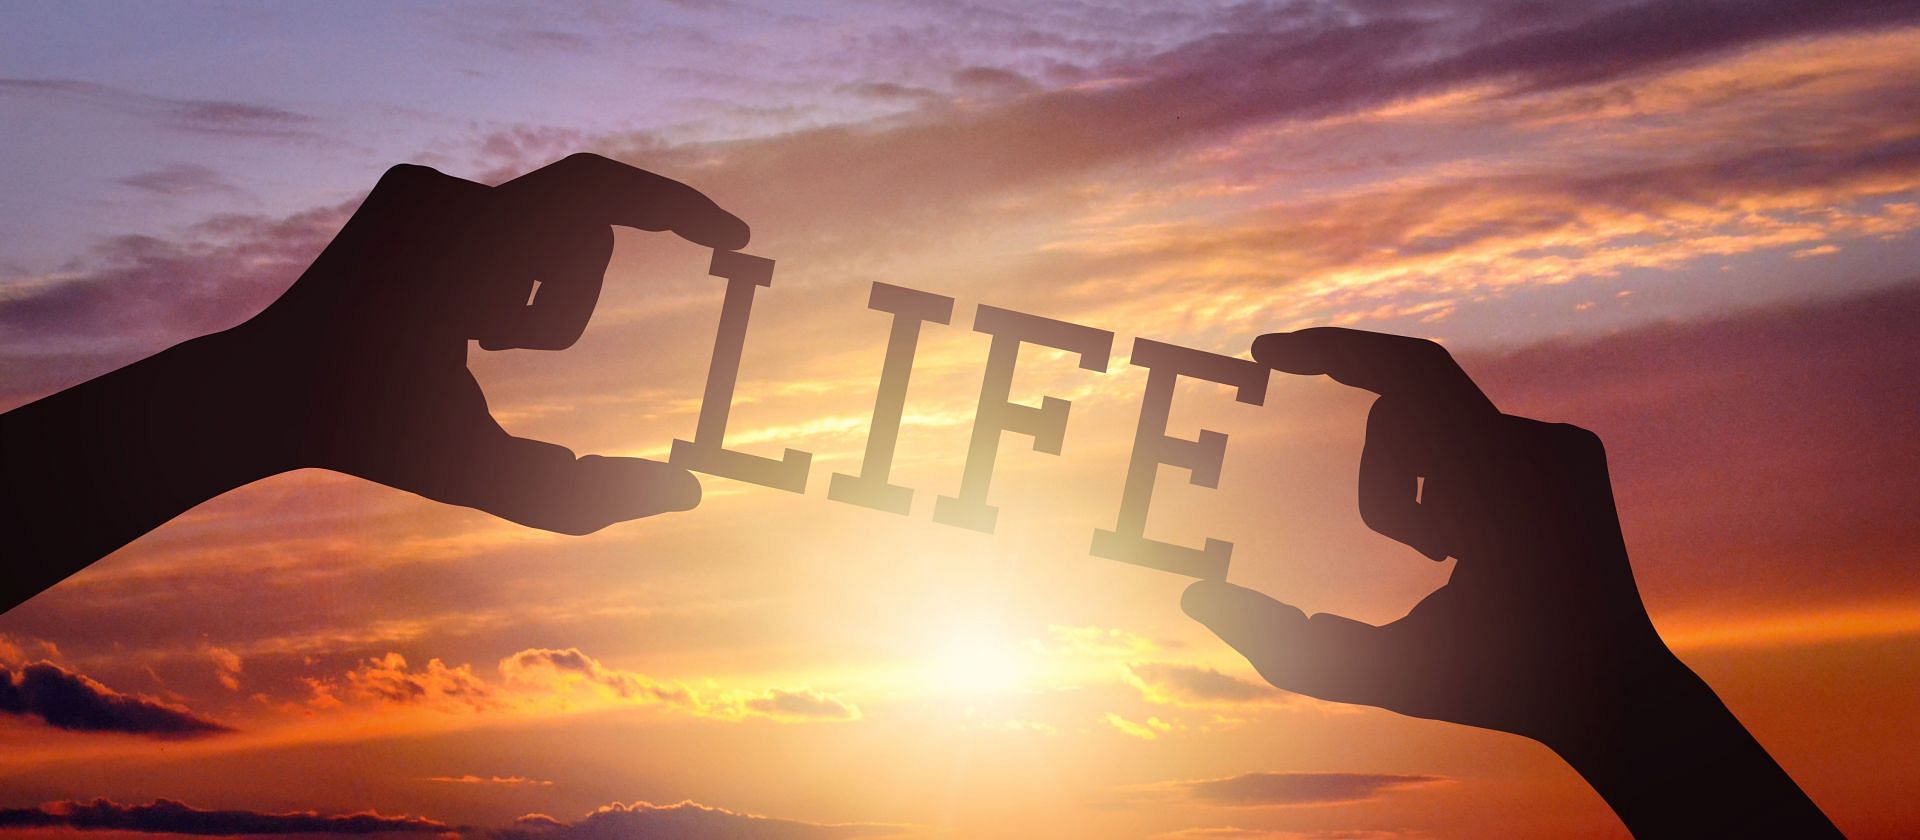 What meaning do you give to your life? Can logotherapy help you discover this? (Image via Vecteezy/ Paweł Pyrlik)